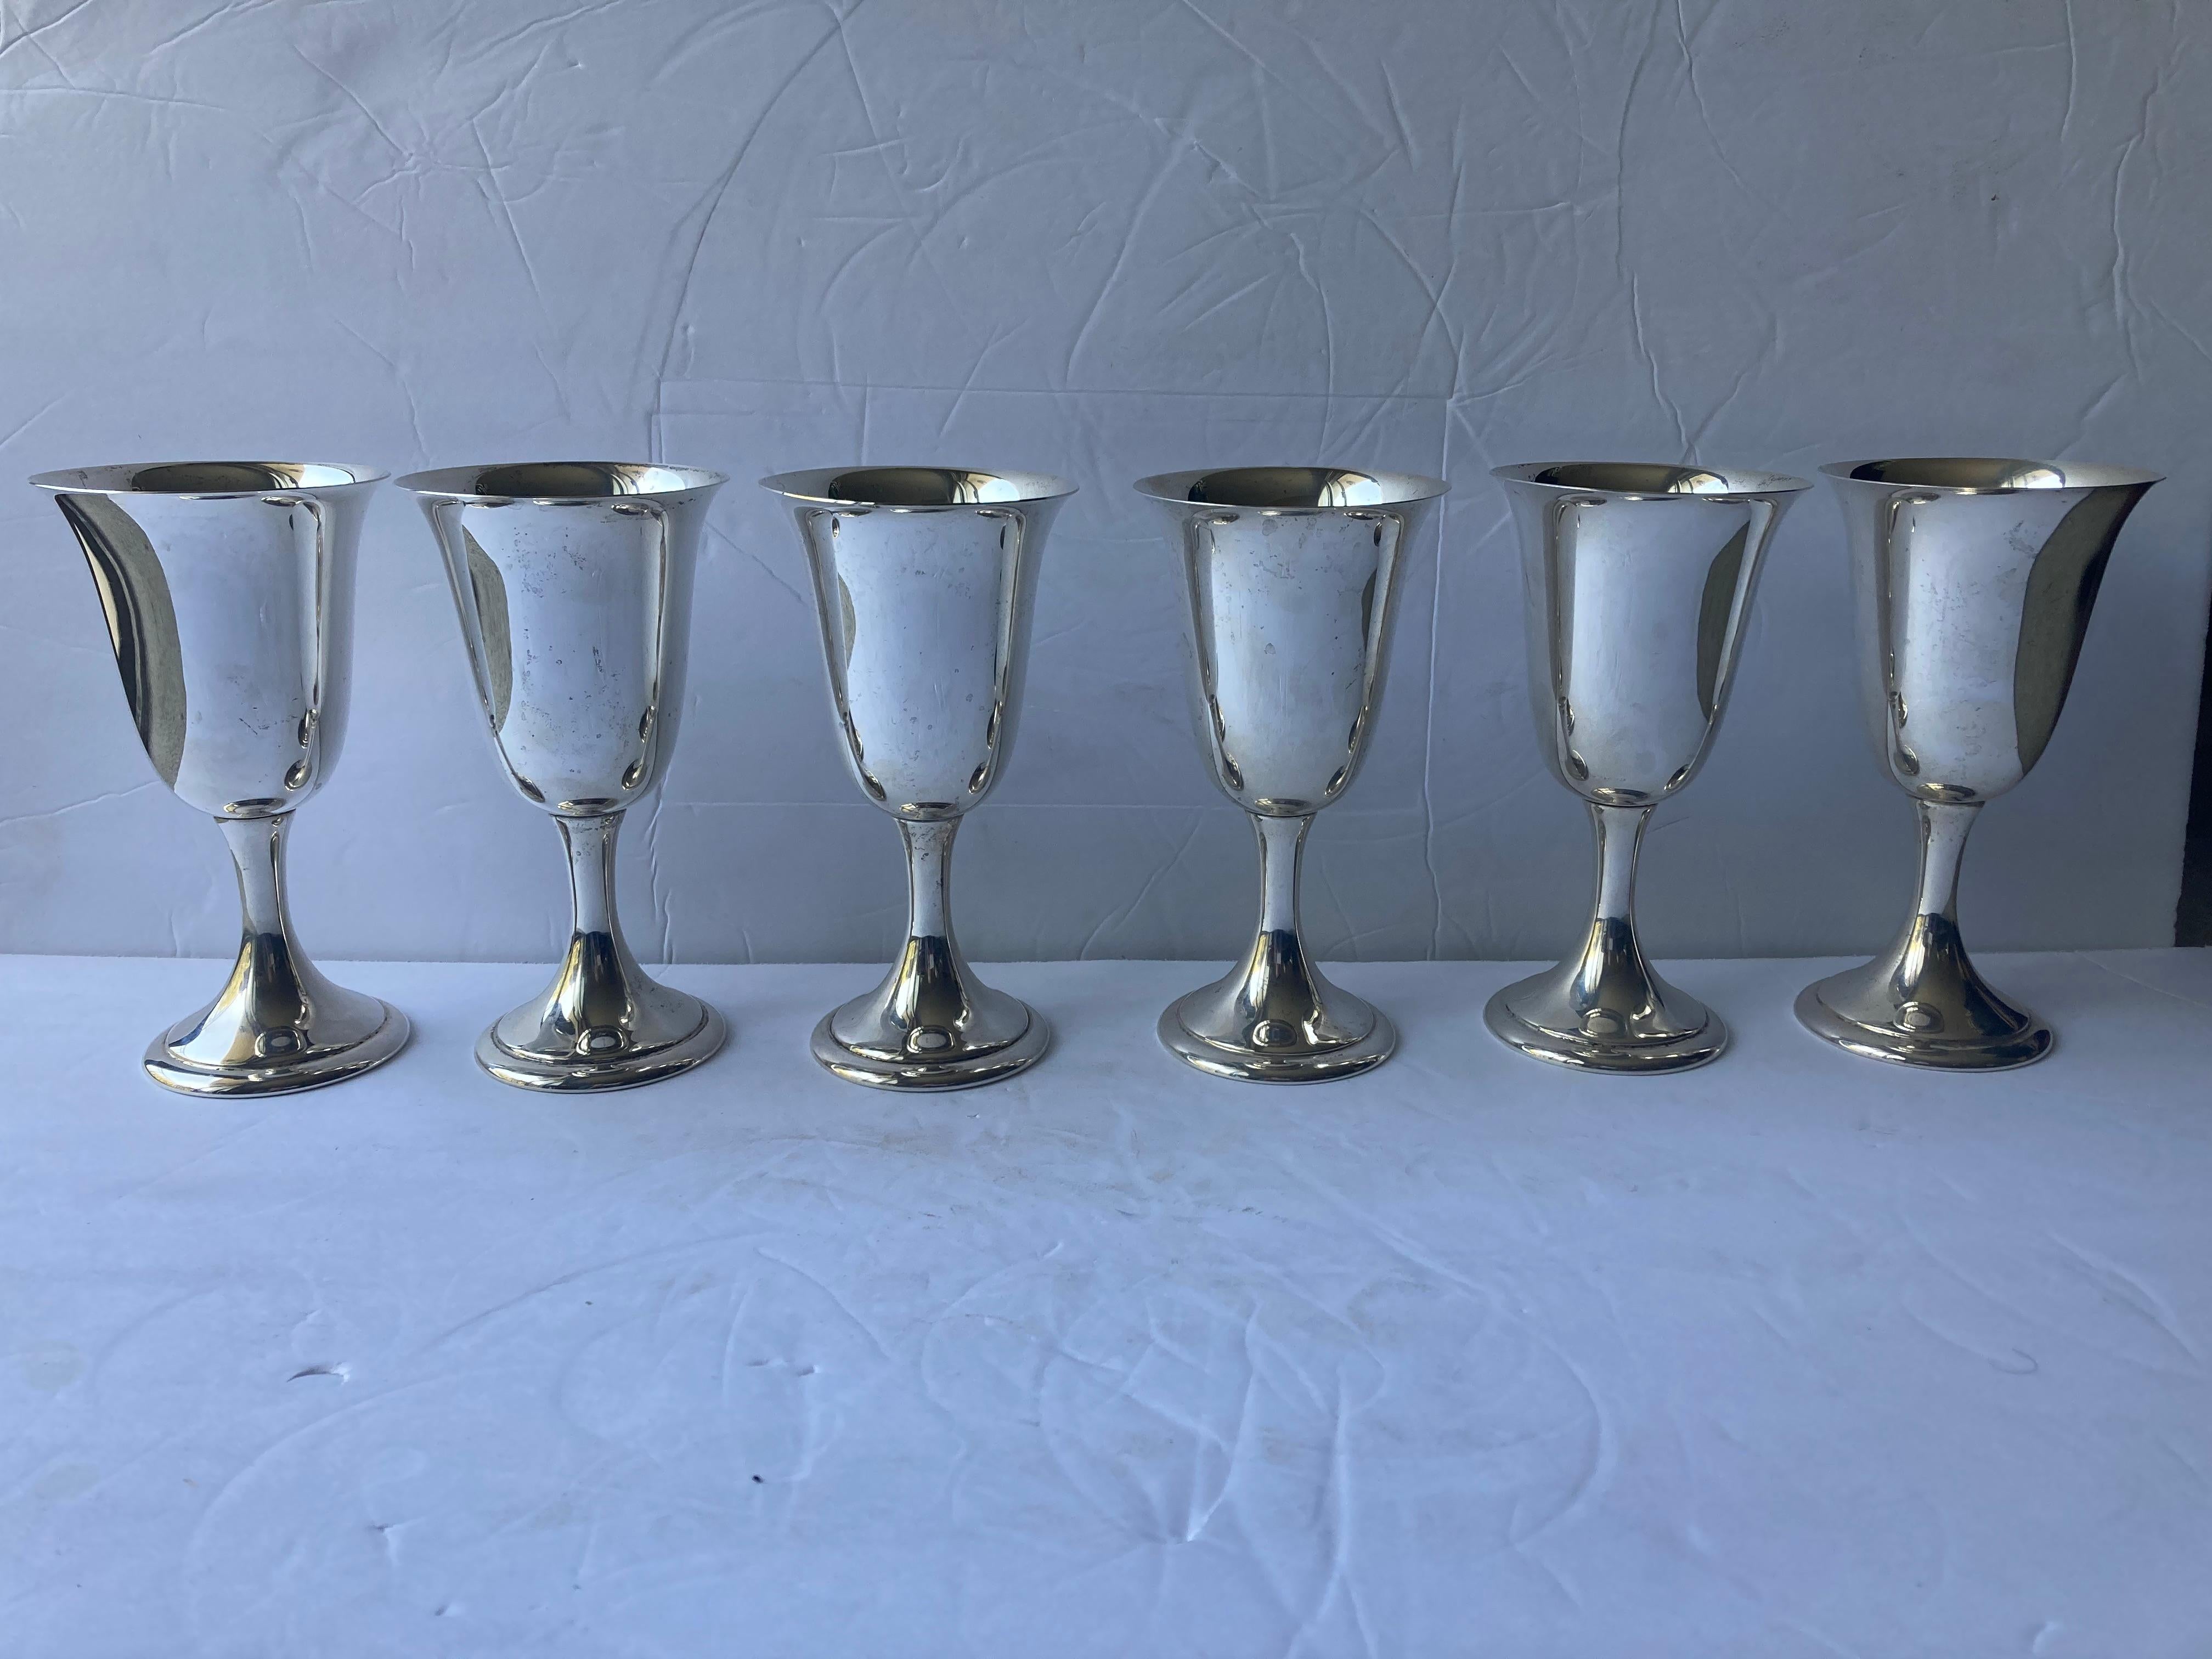 Beautiful set of Goblets by Alvin in sterling silver. These goblets were purchased from the estate of an important Hollywood star in Los Angeles .